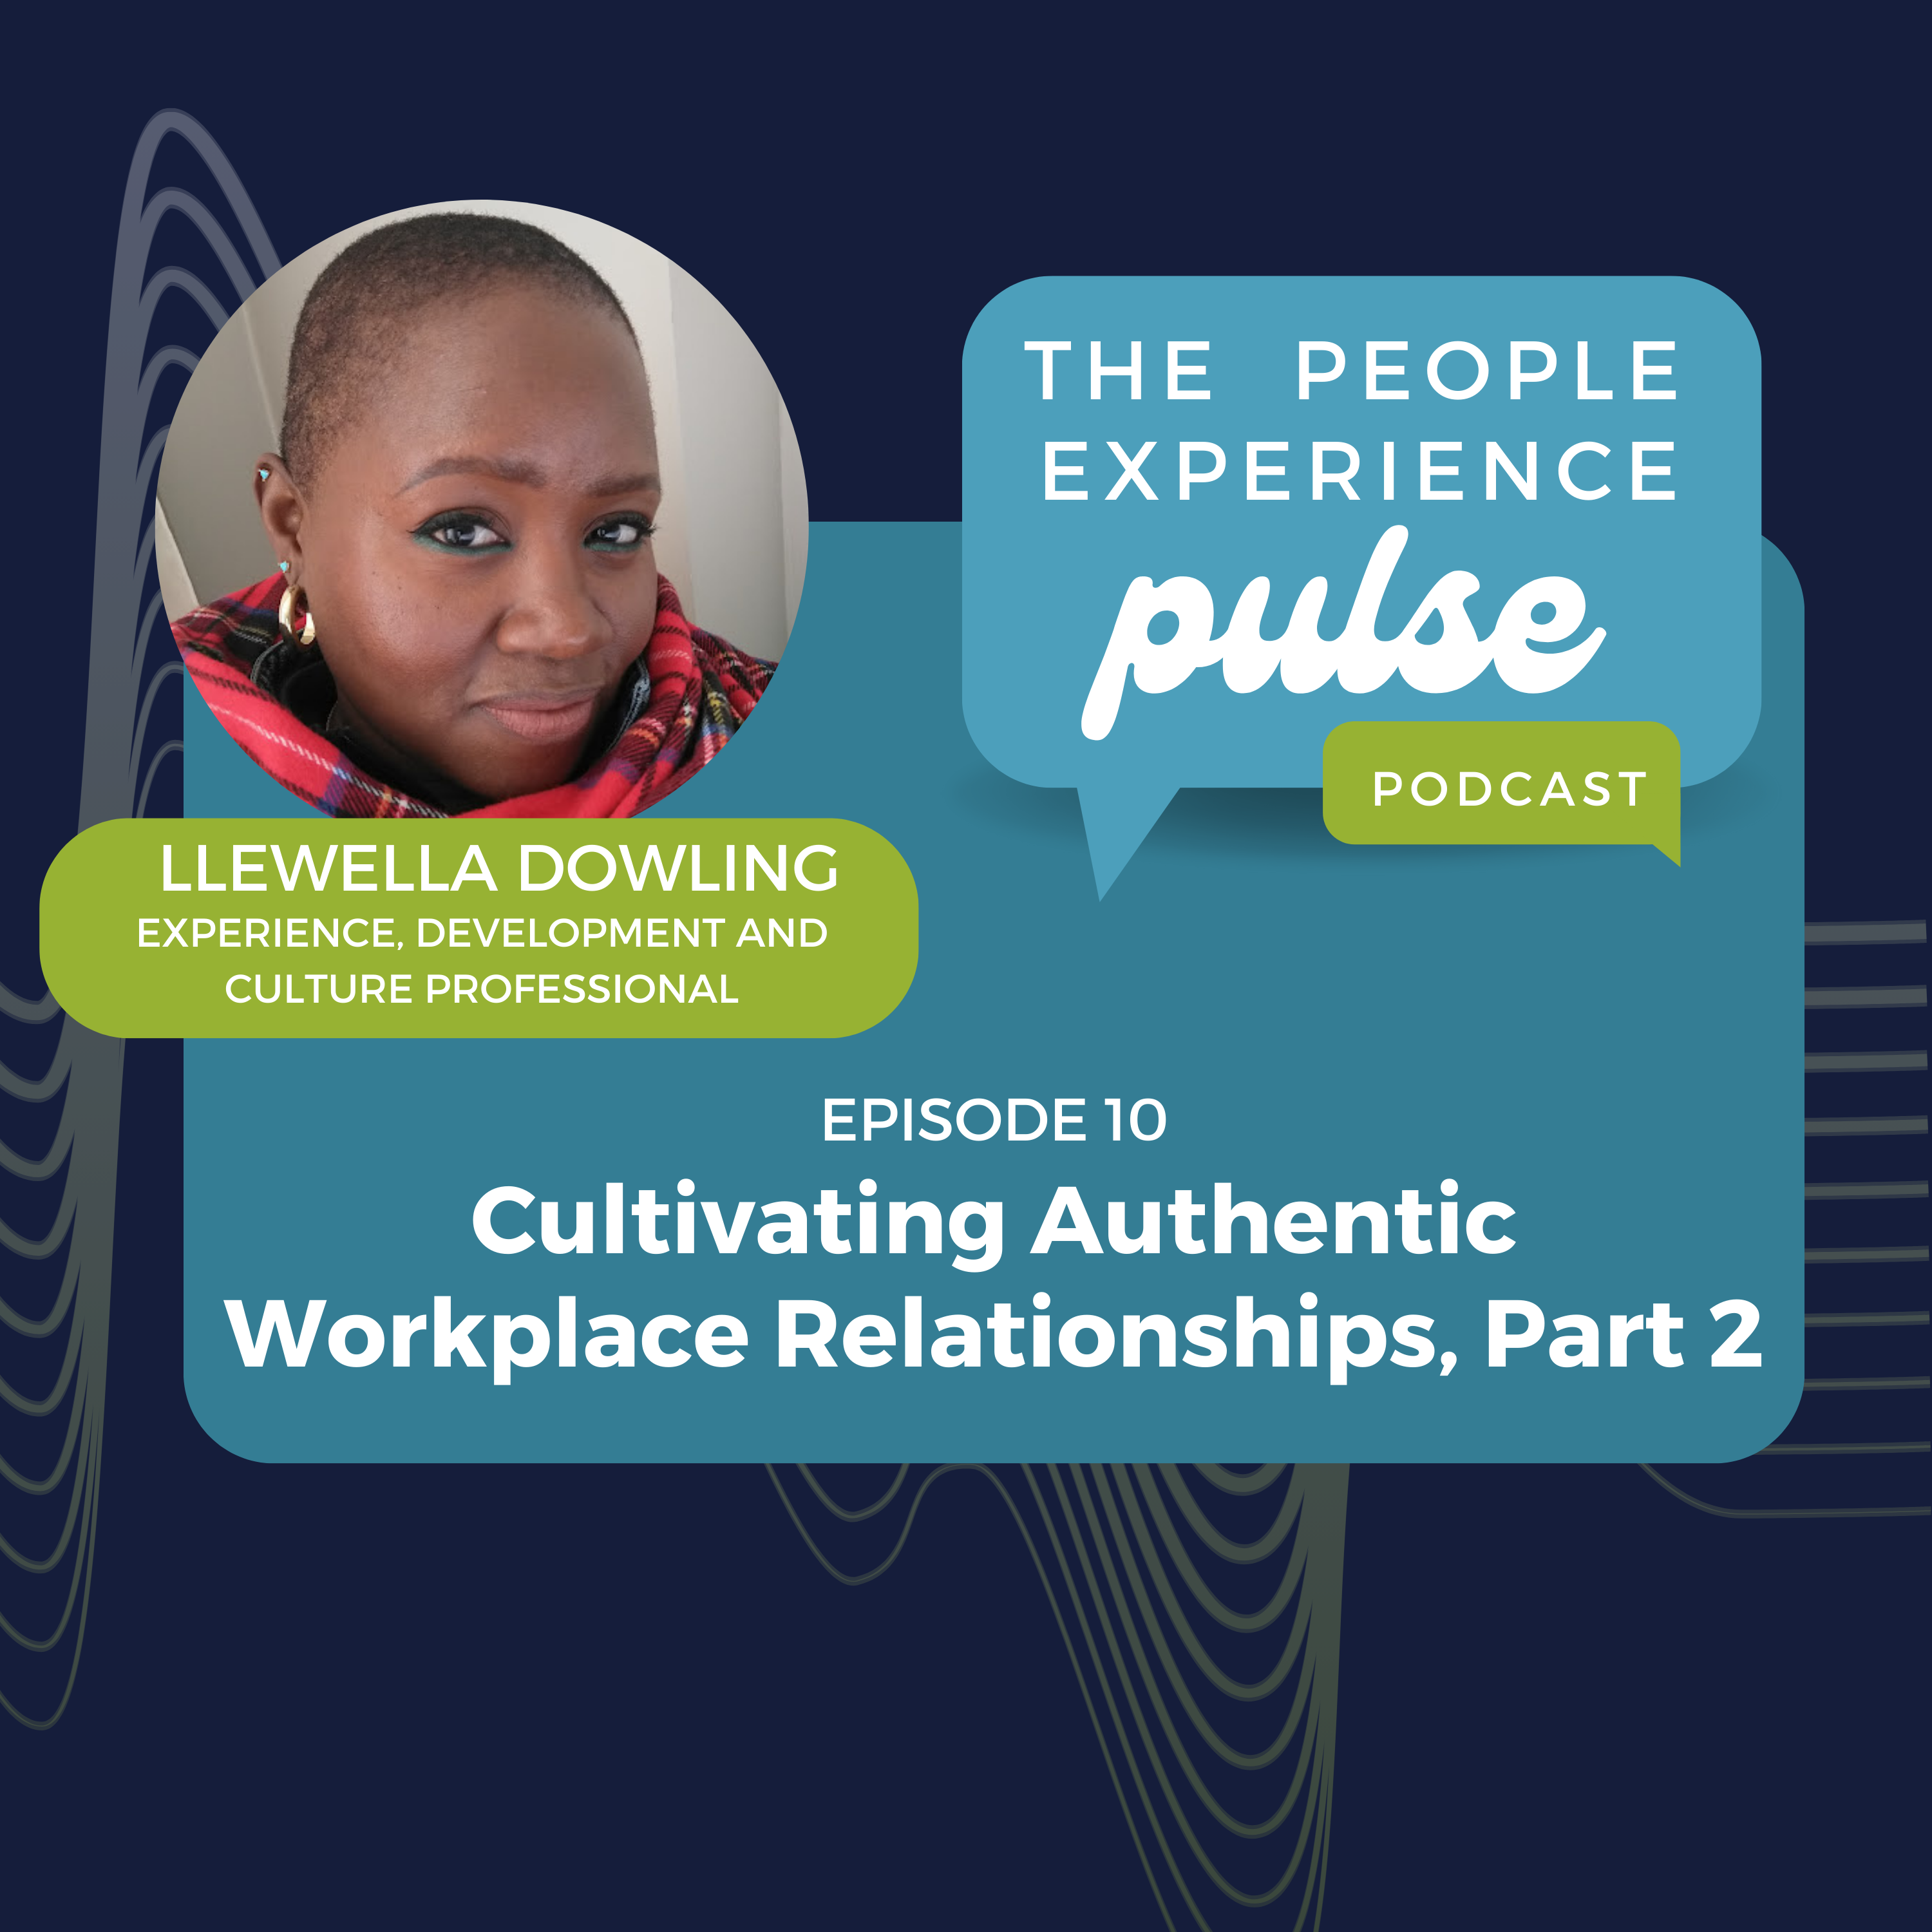 Cultivating Authentic Workplace Relationships with Llewella Dowling, Part 2